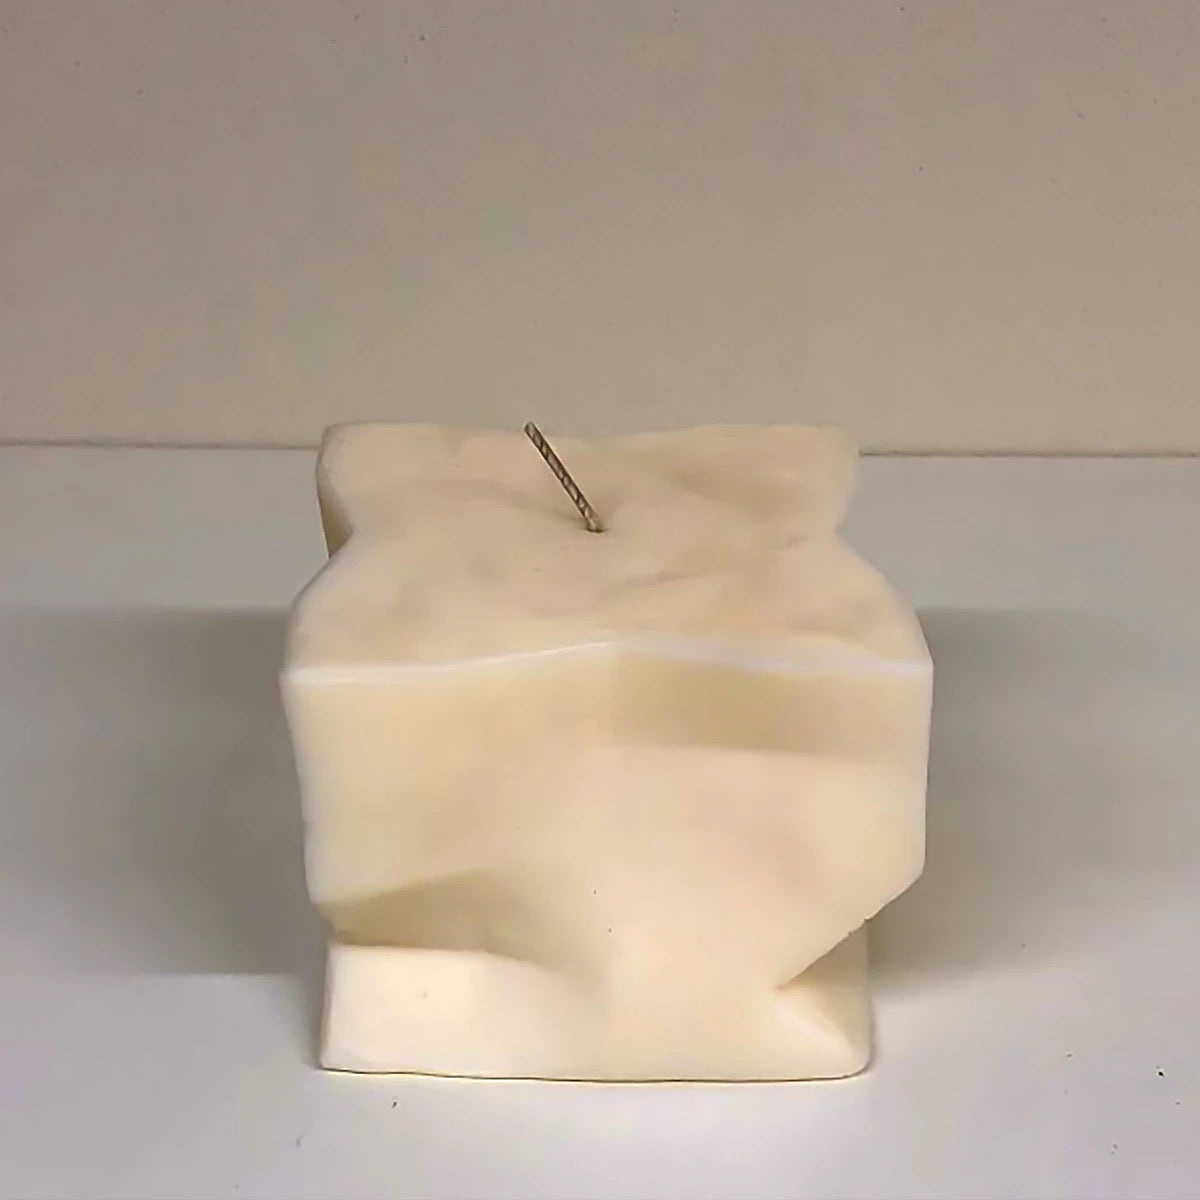 A Baltazar Candle by Andrej Urem sitting on top of a white surface.